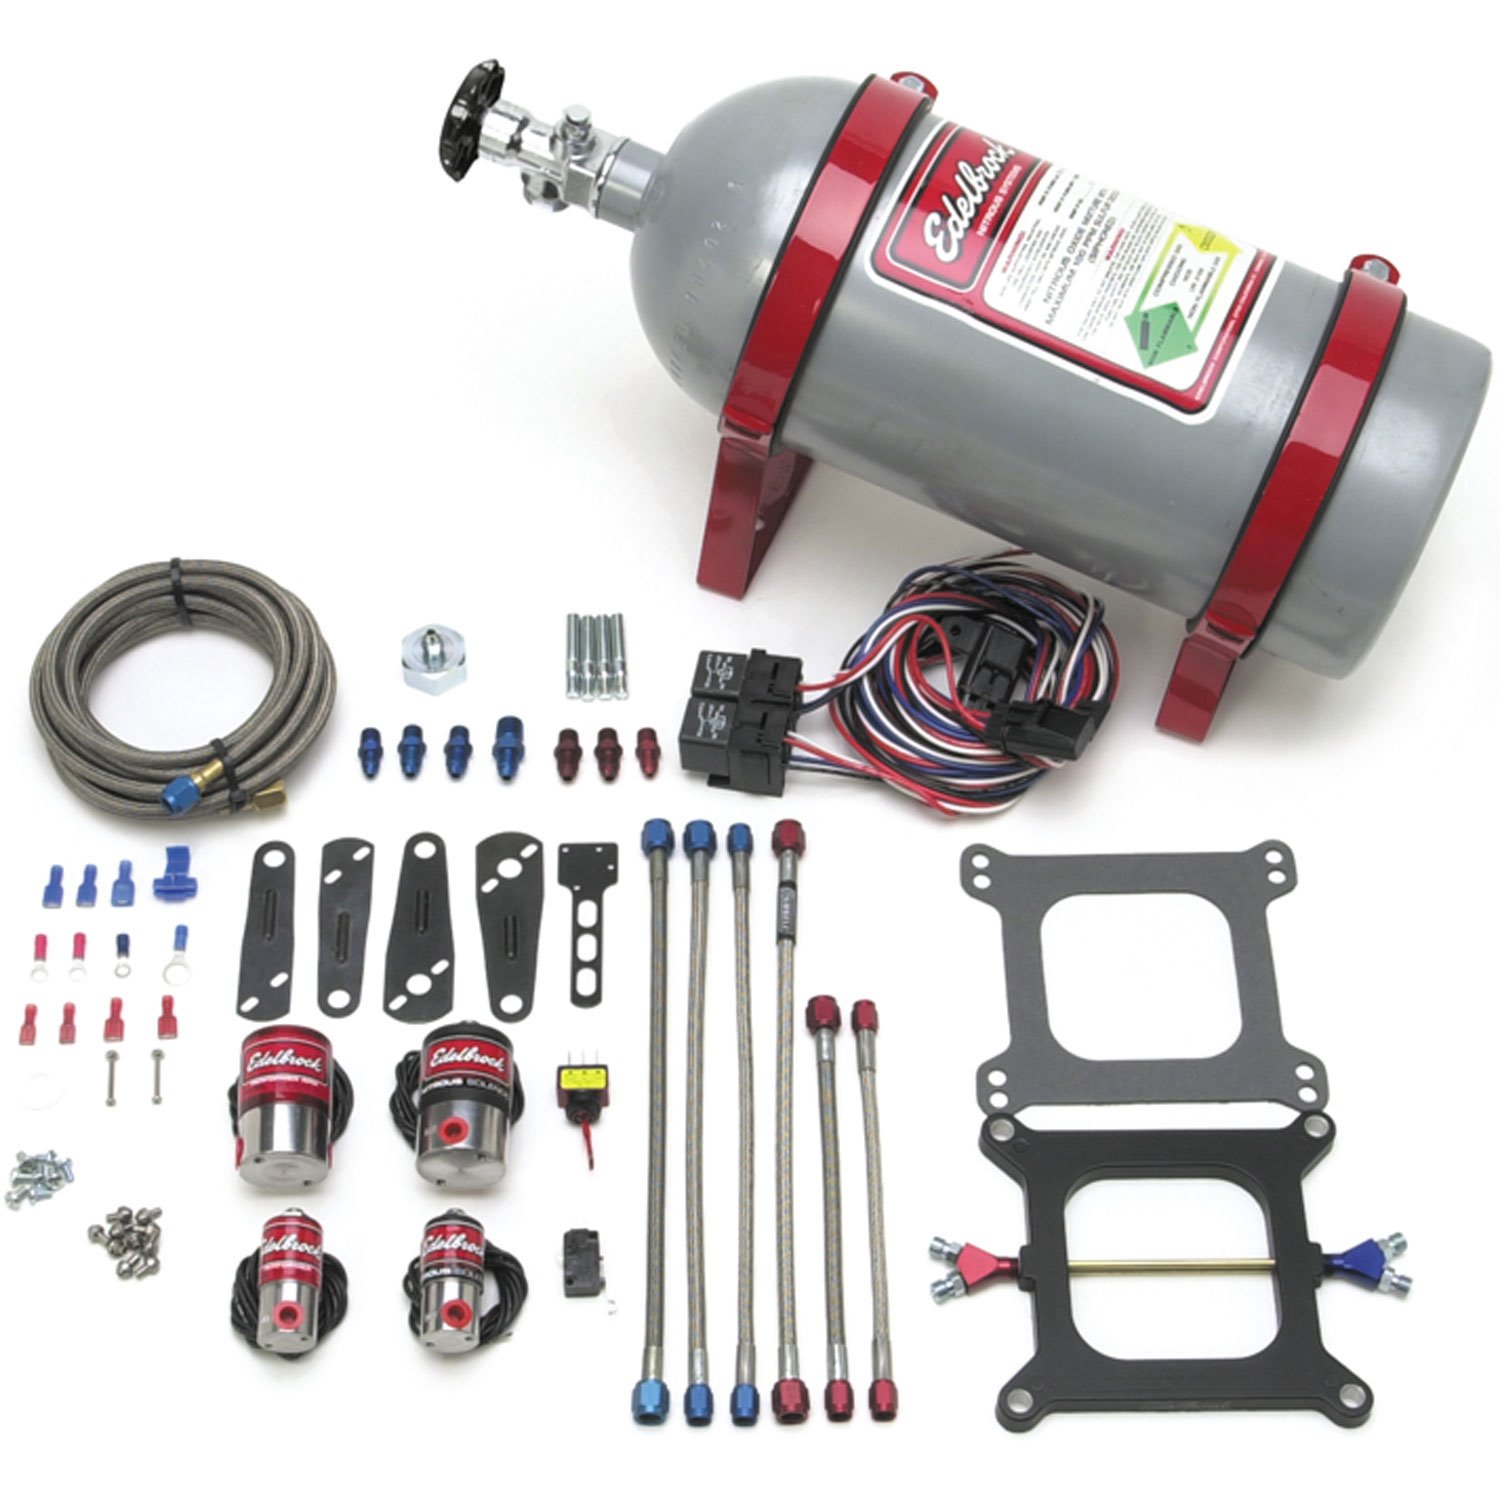 Performer RPM Dual Stage Nitrous Kit for 4150 Square-bore Carburetor with Silver Powder Coated Bottle